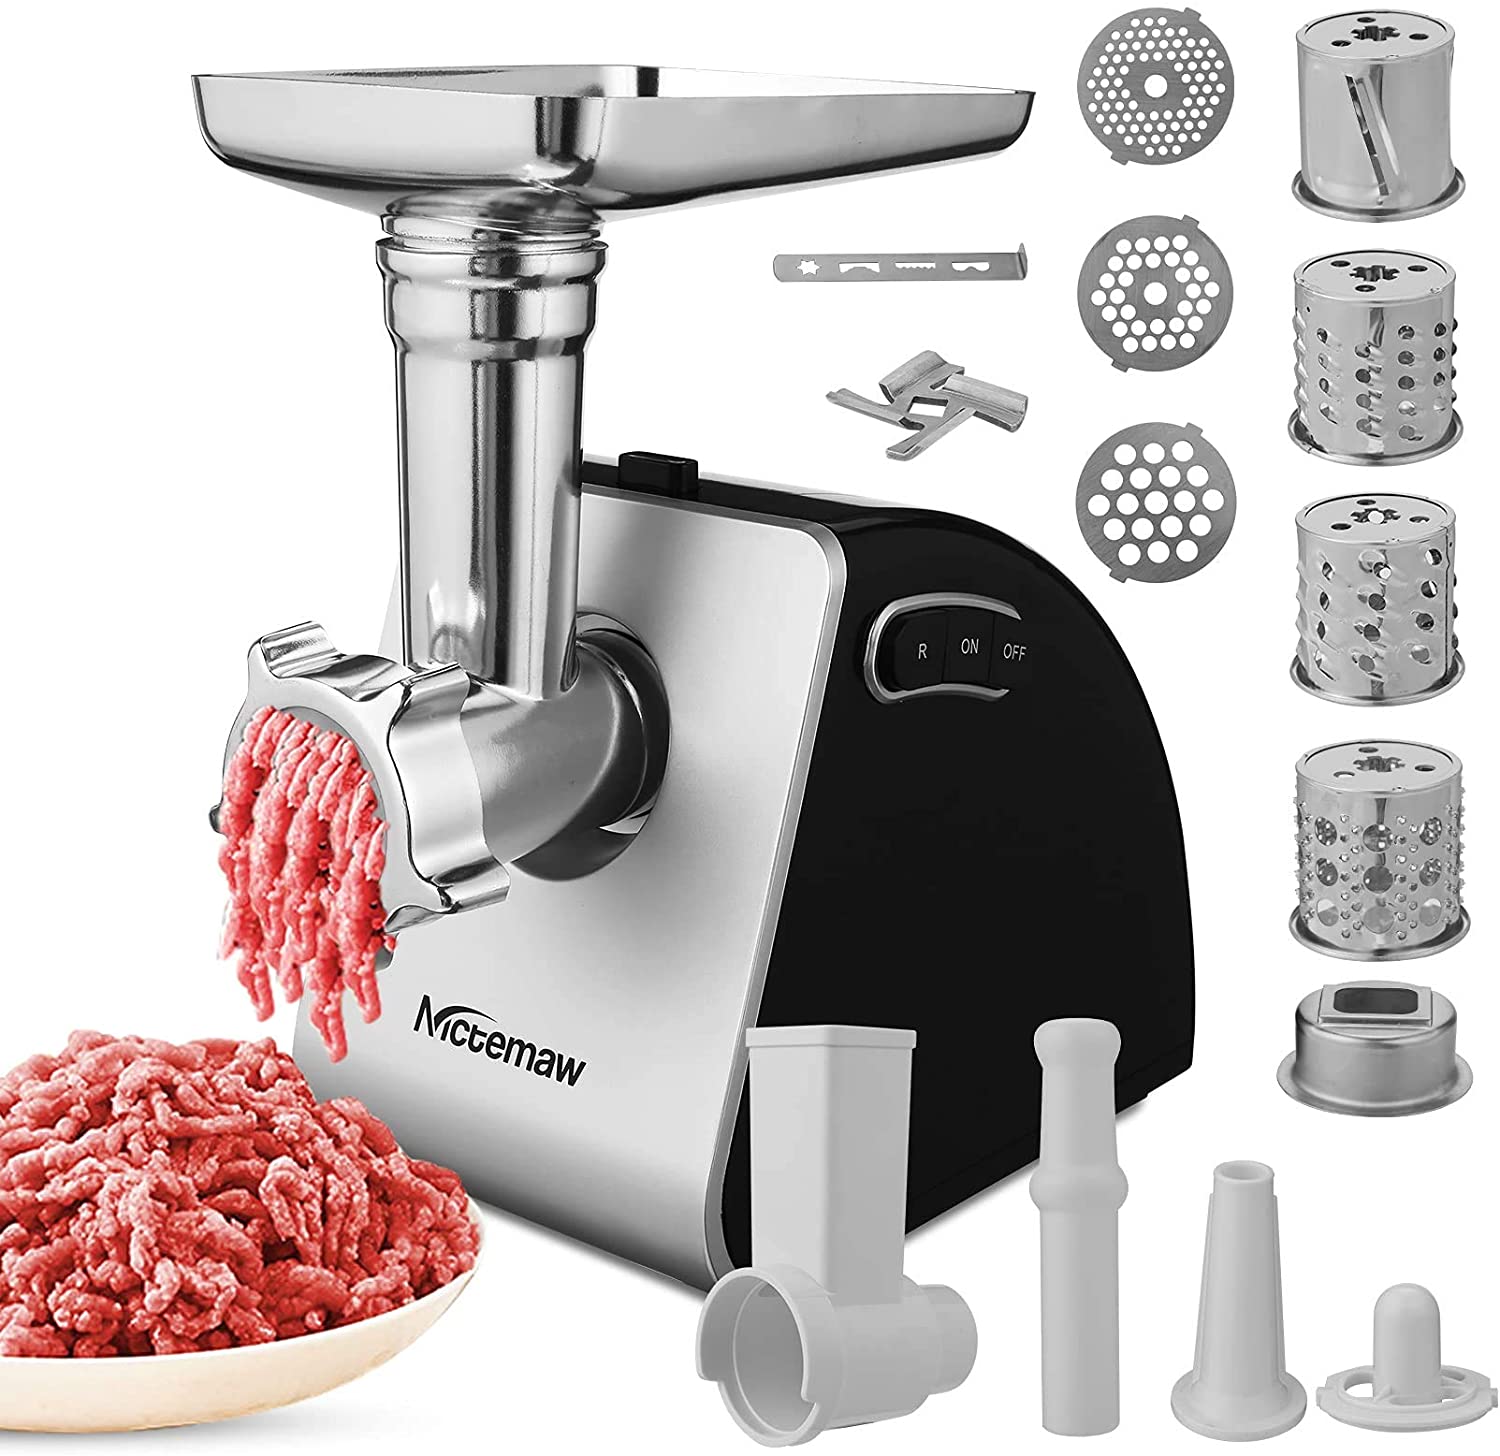 Nictemaw Electric Meat Mincer, Stainless Steel, 2-in-1 Multifunctional Mach